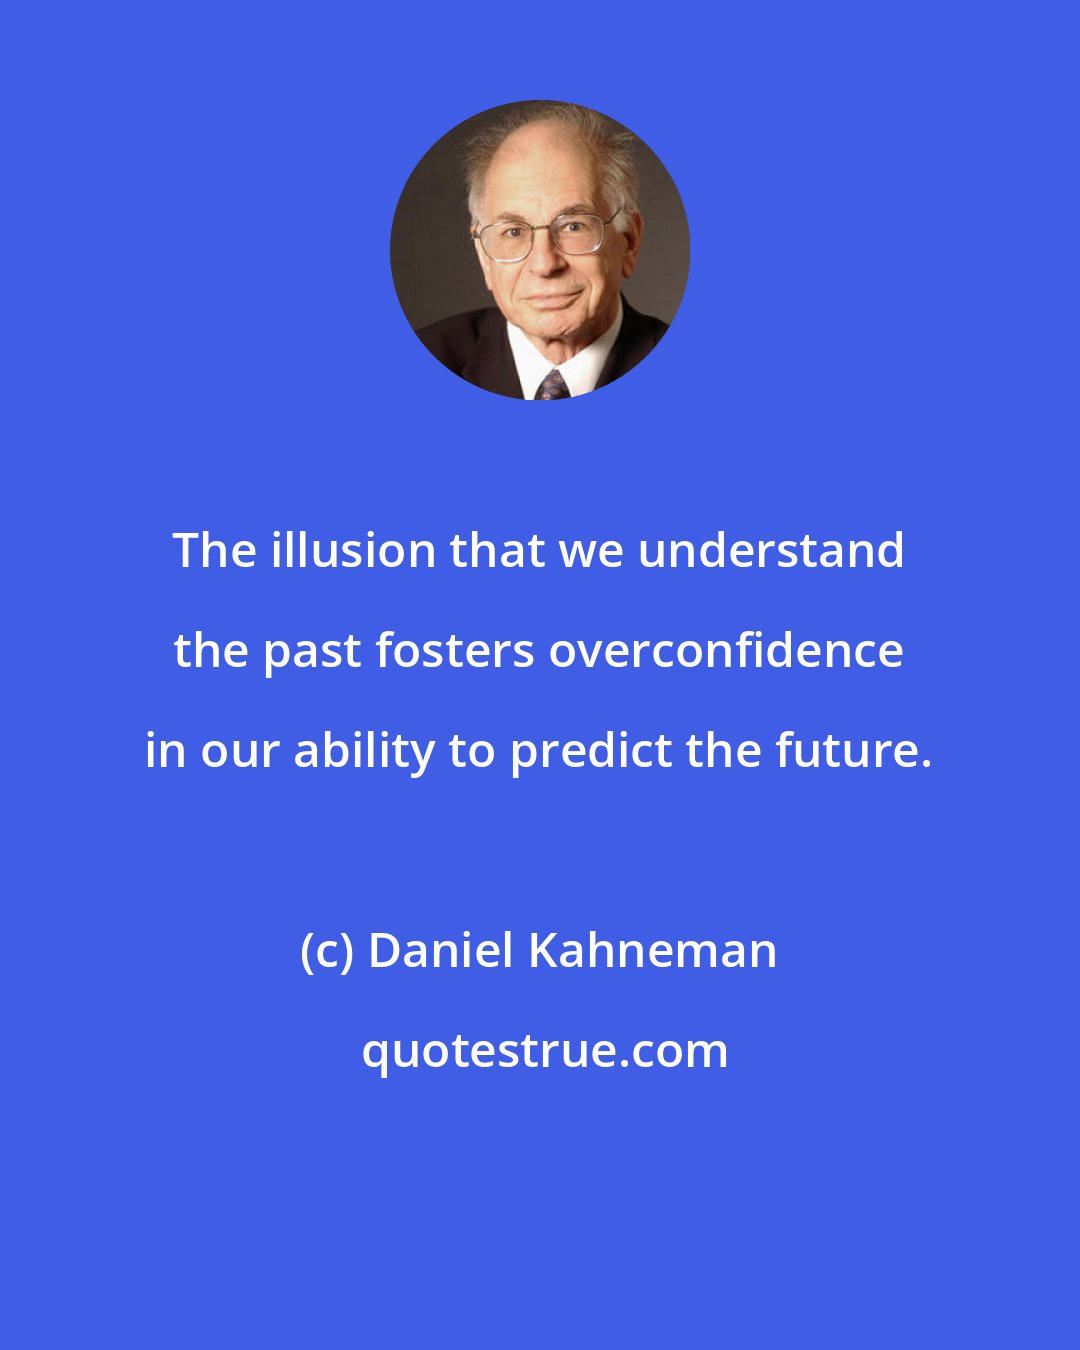 Daniel Kahneman: The illusion that we understand the past fosters overconfidence in our ability to predict the future.